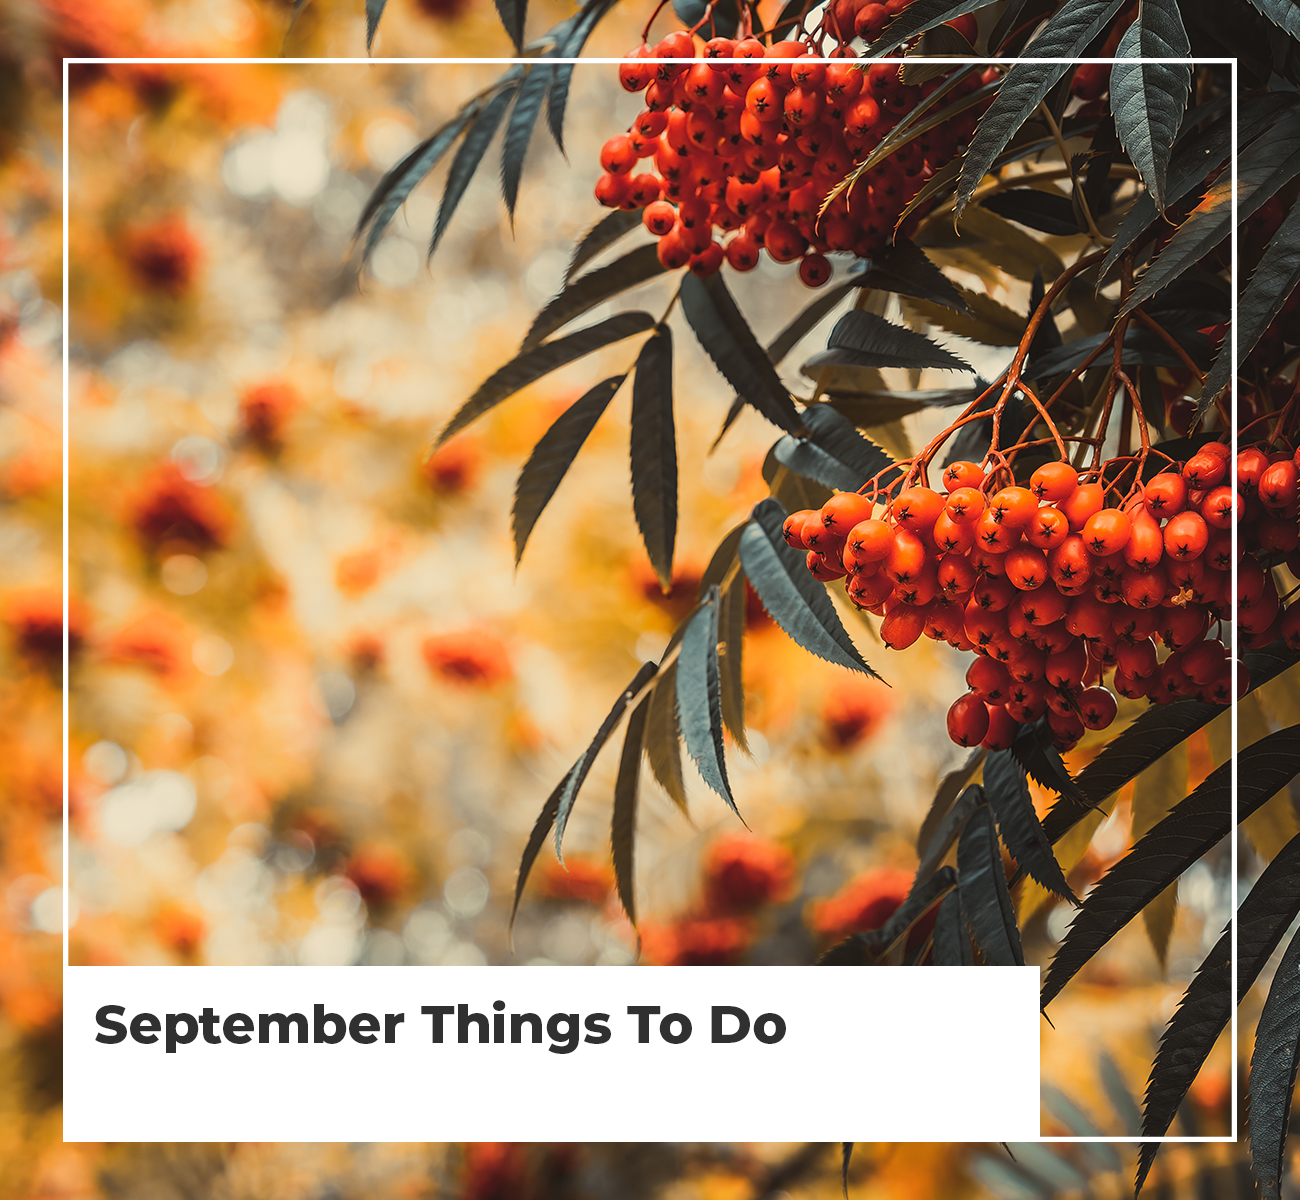 September Things To Do - Main Image